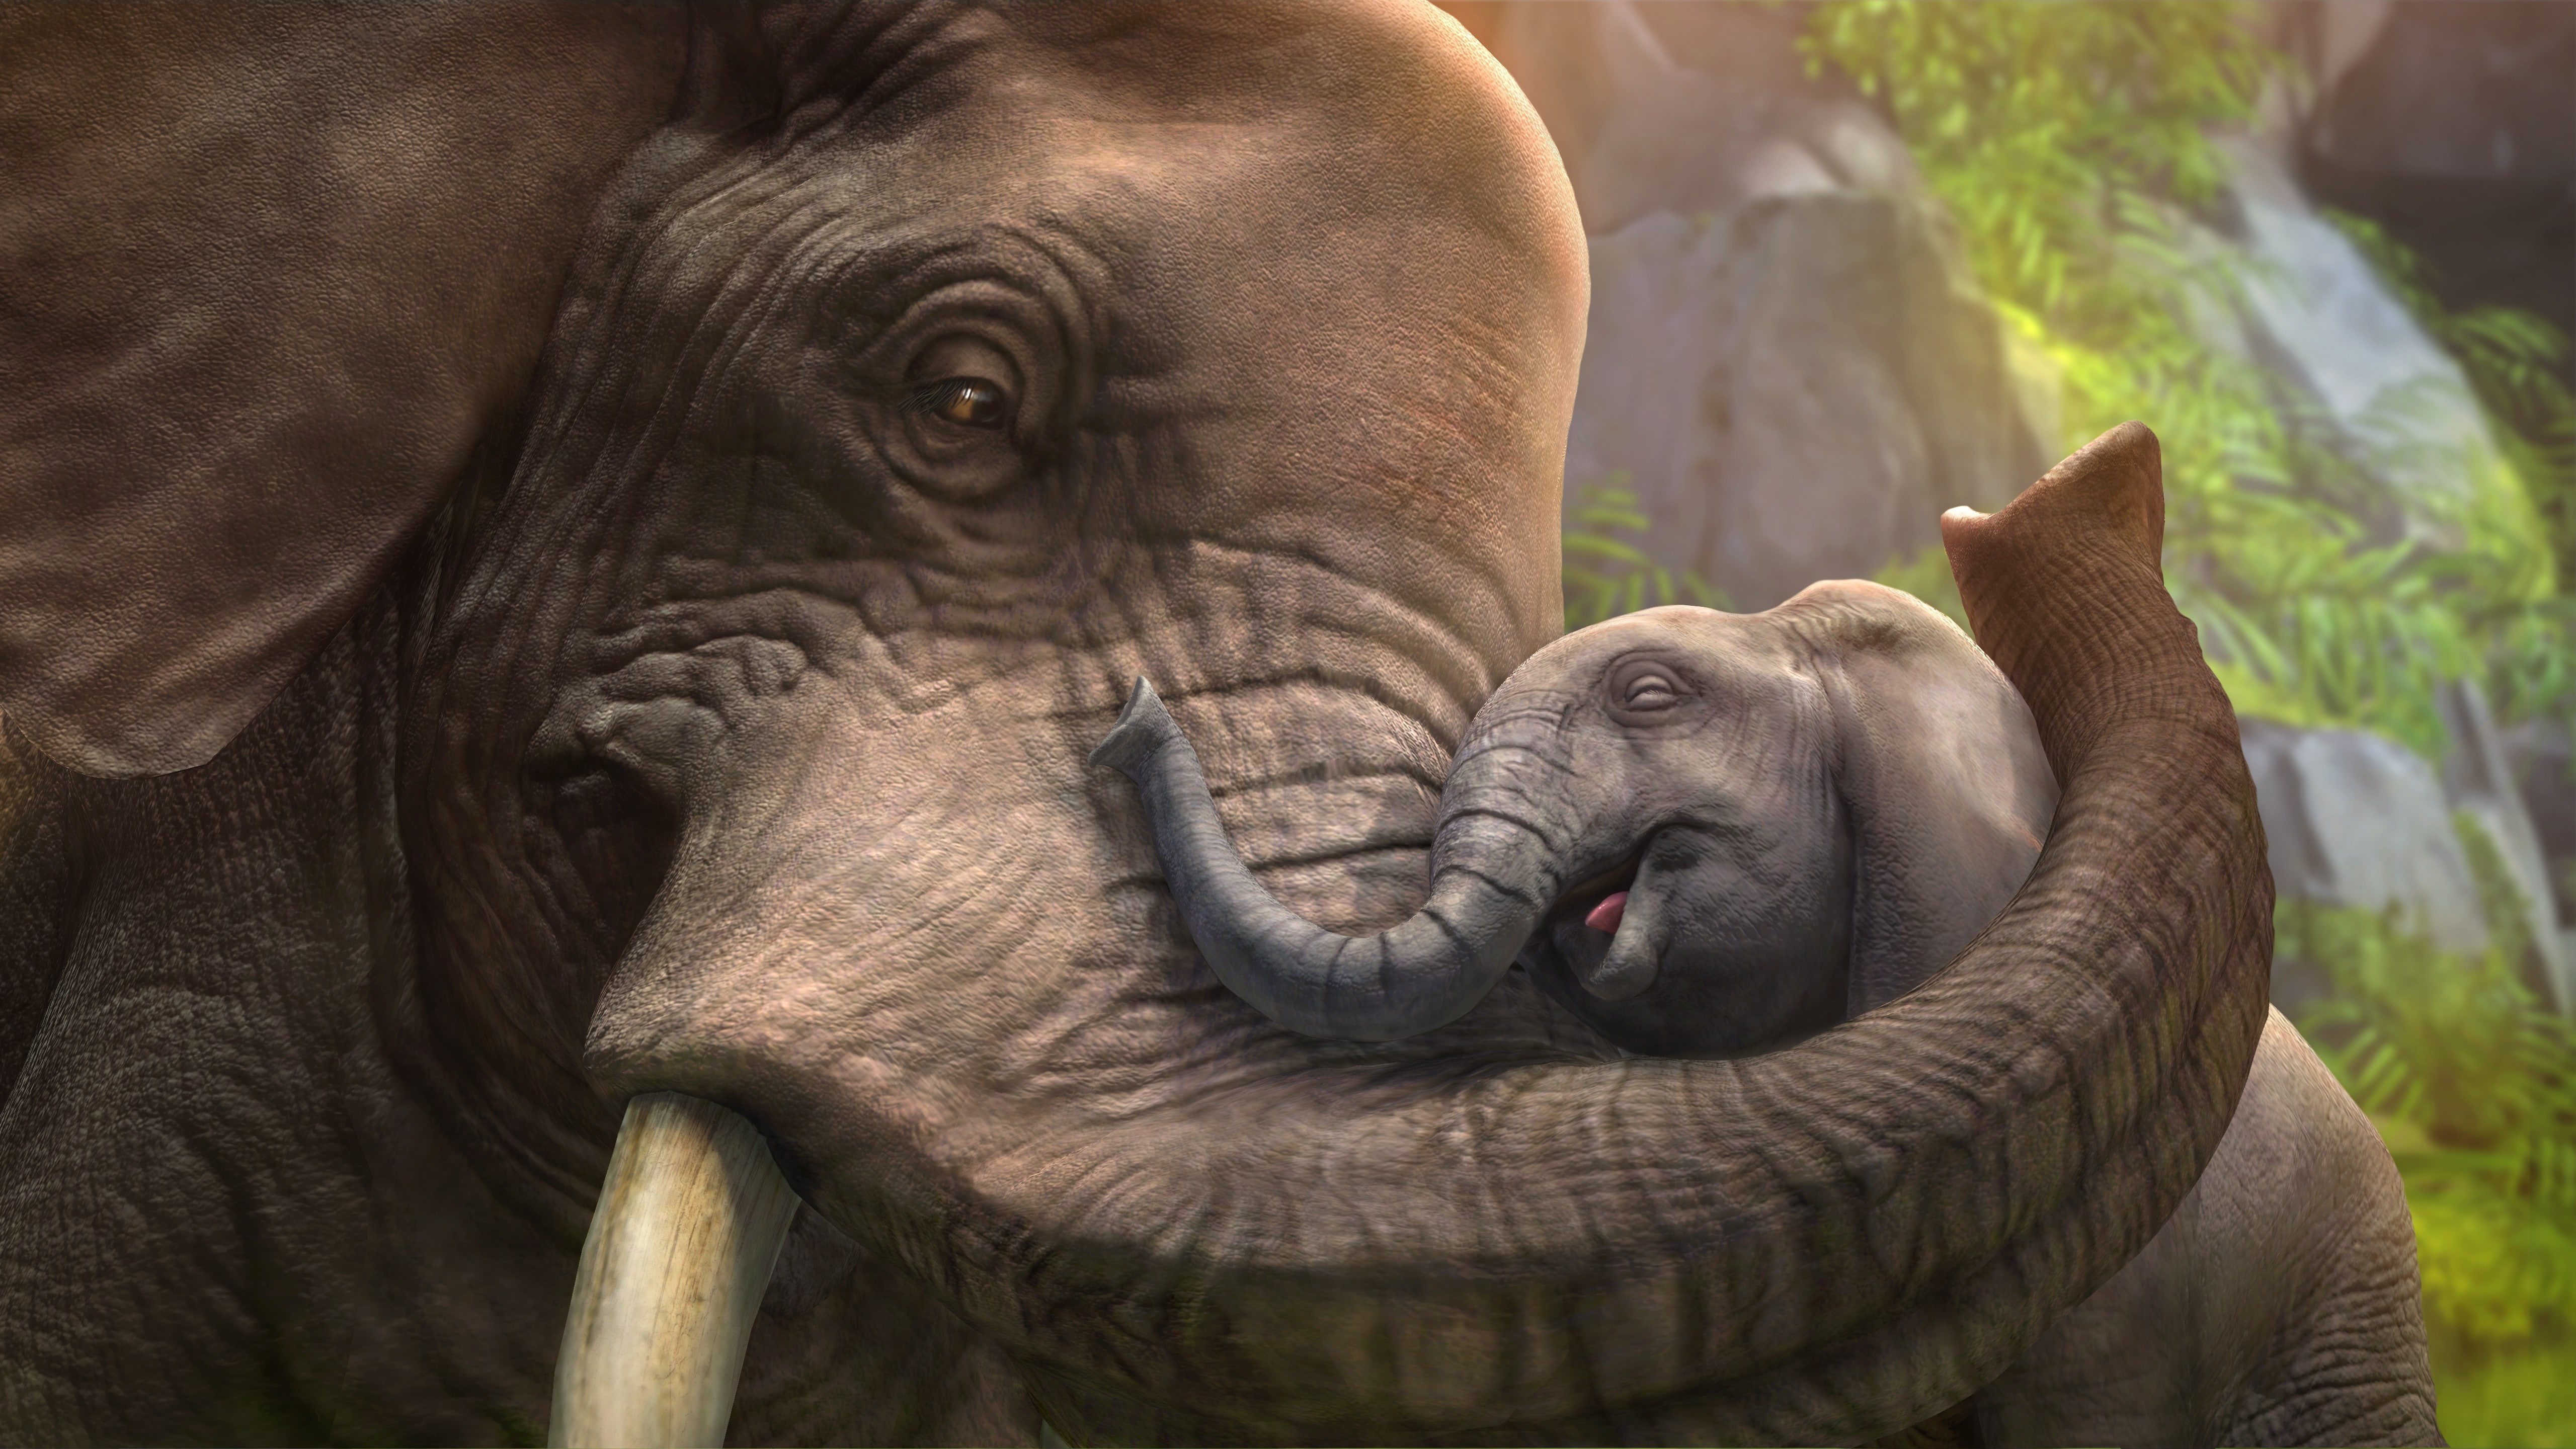 digital wallpaper of elephant and calf, cub, zoo tycoon, animals